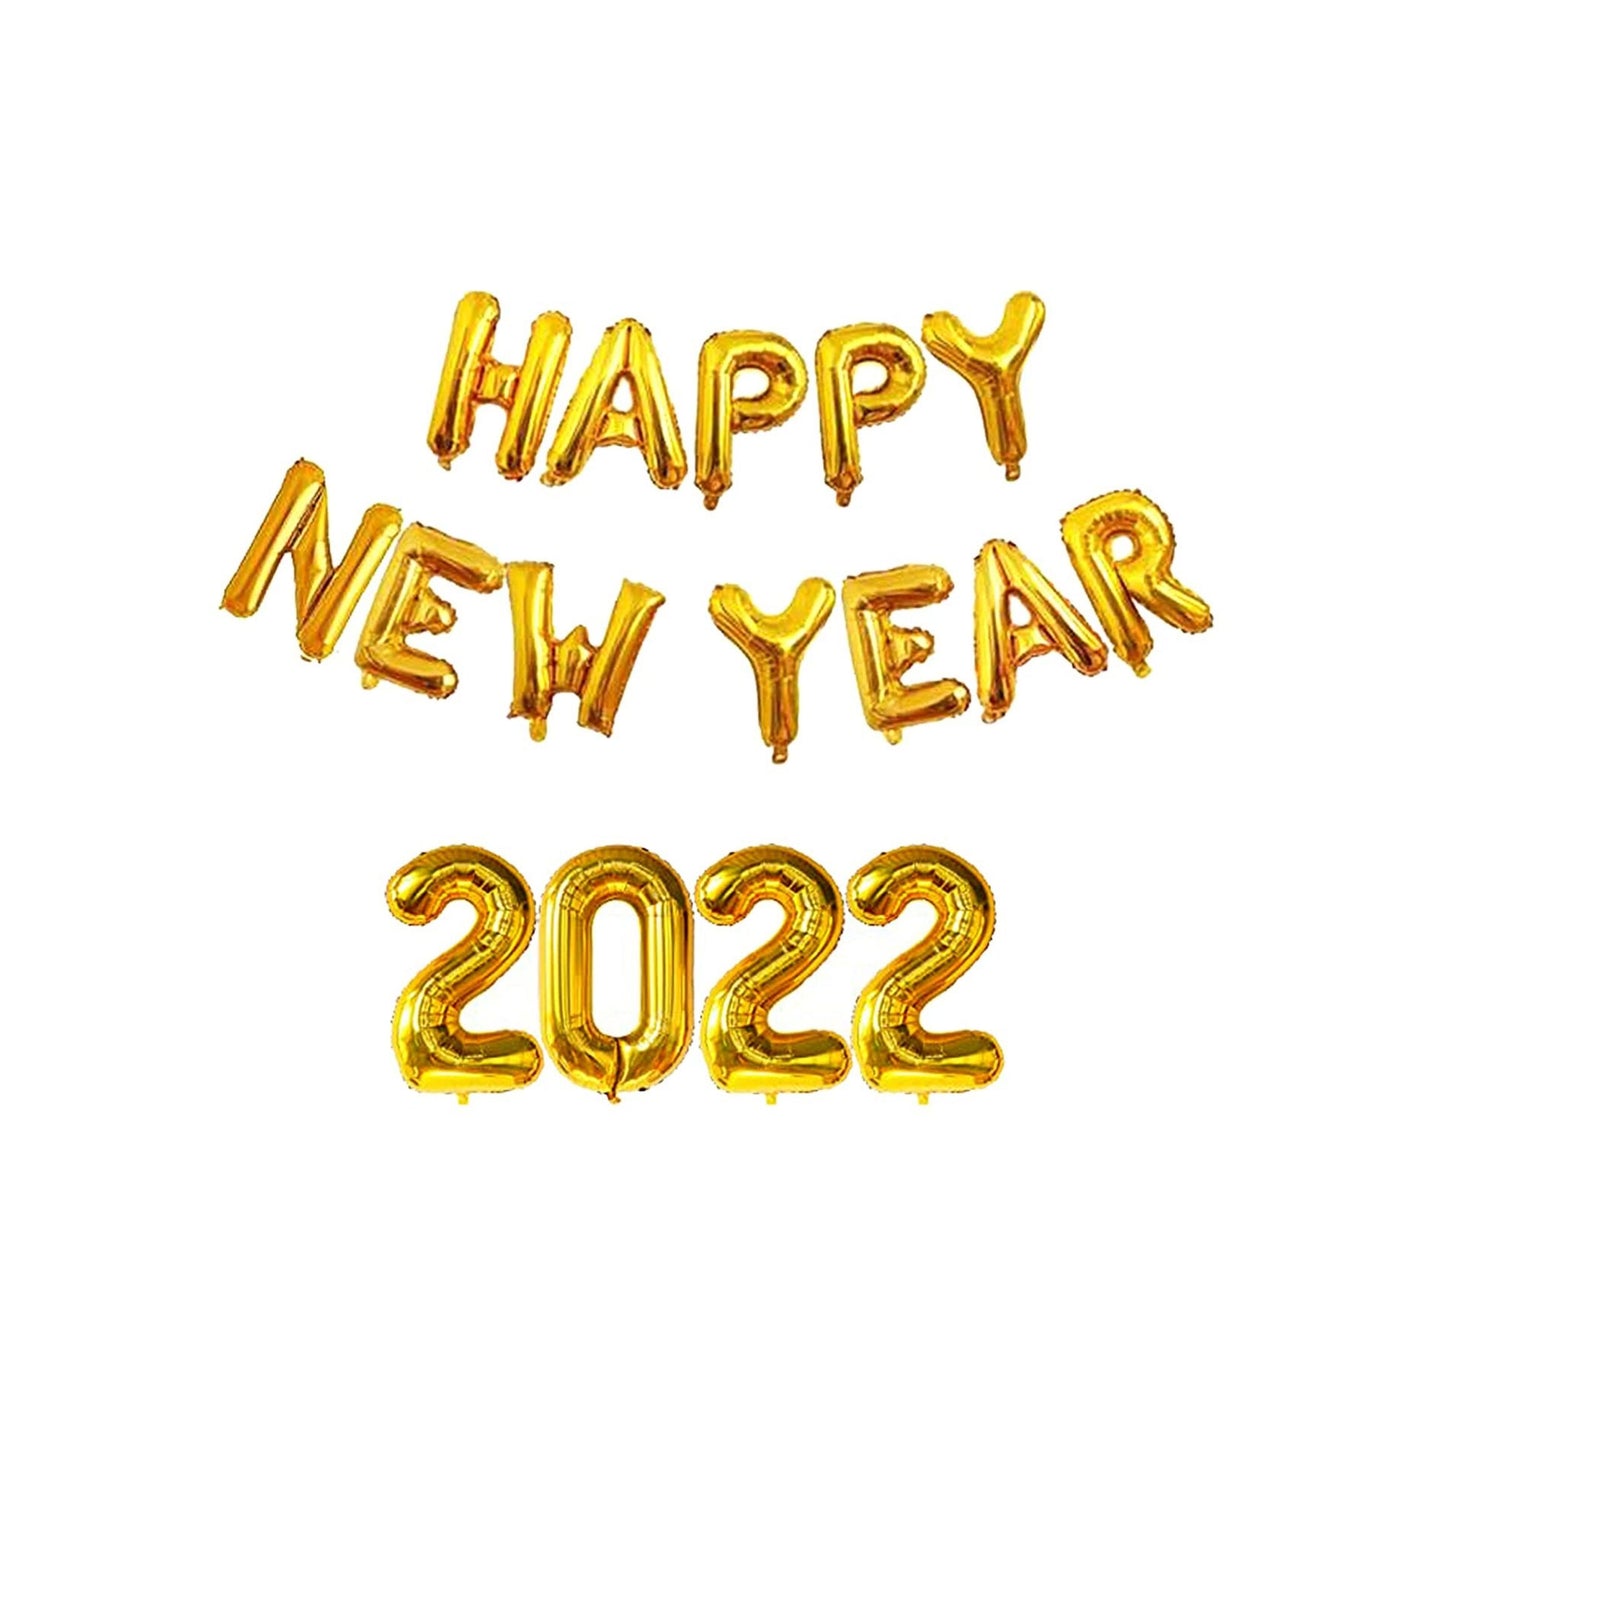 Gold Happy New Year 2023 Foil Balloon DIY Decoration Kit with Big 2023 Digits (16 pcs)